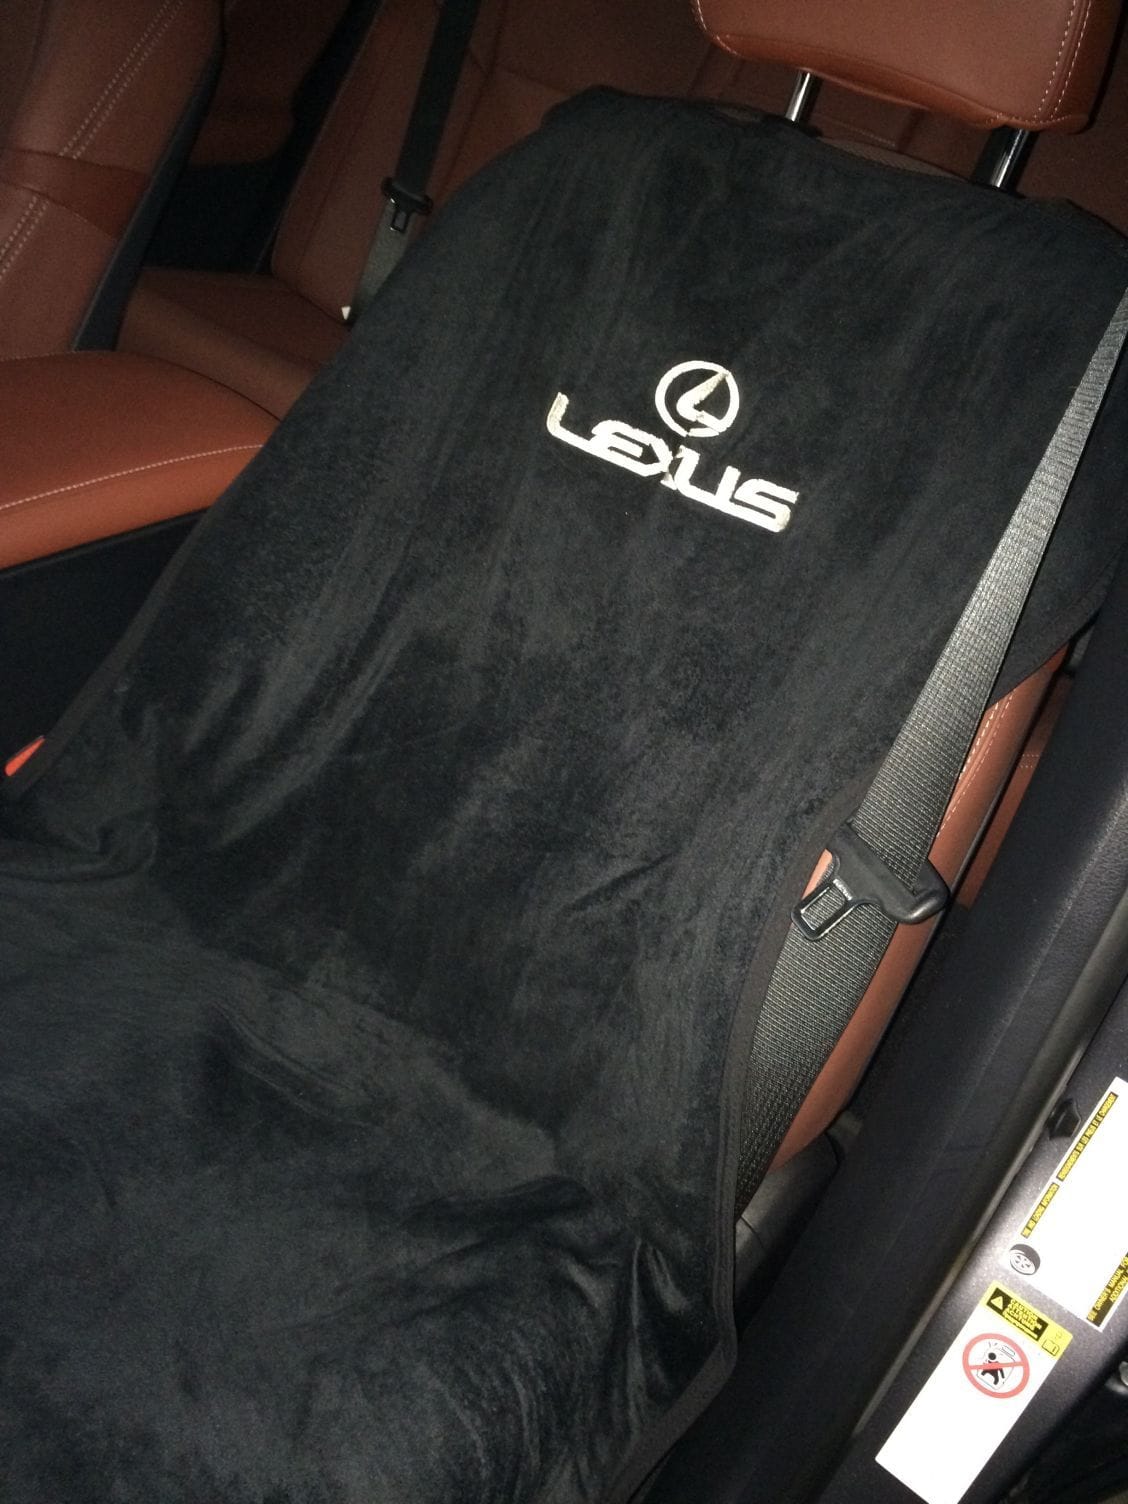 Looking for suggestions on removing blue jean stain on tan leather -  ClubLexus - Lexus Forum Discussion